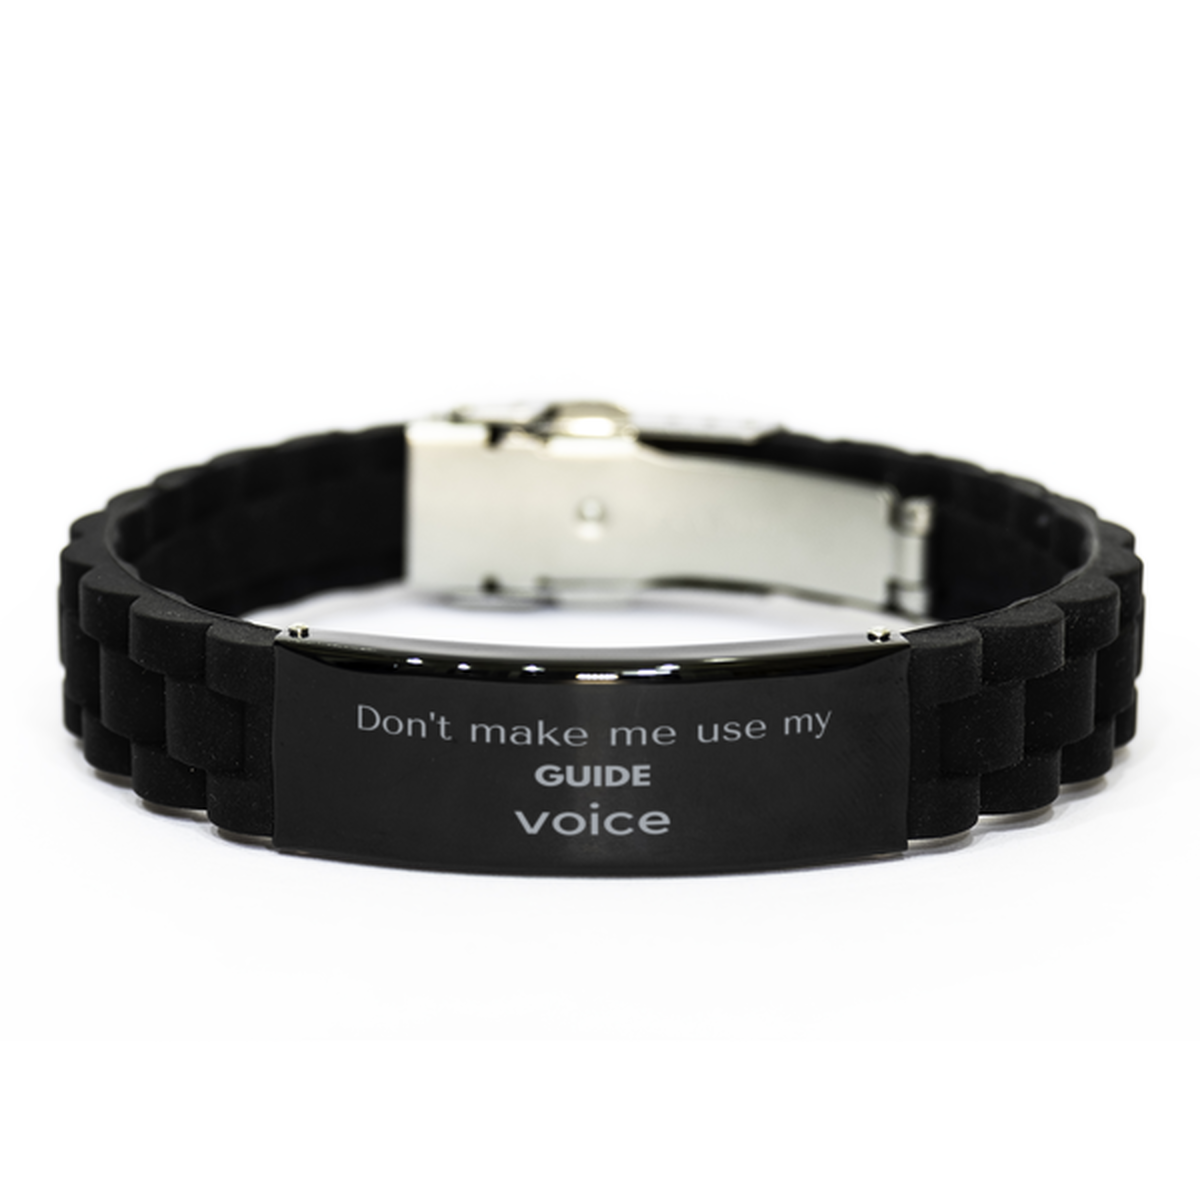 Don't make me use my Guide voice, Sarcasm Guide Gifts, Christmas Guide Black Glidelock Clasp Bracelet Birthday Unique Gifts For Guide Coworkers, Men, Women, Colleague, Friends